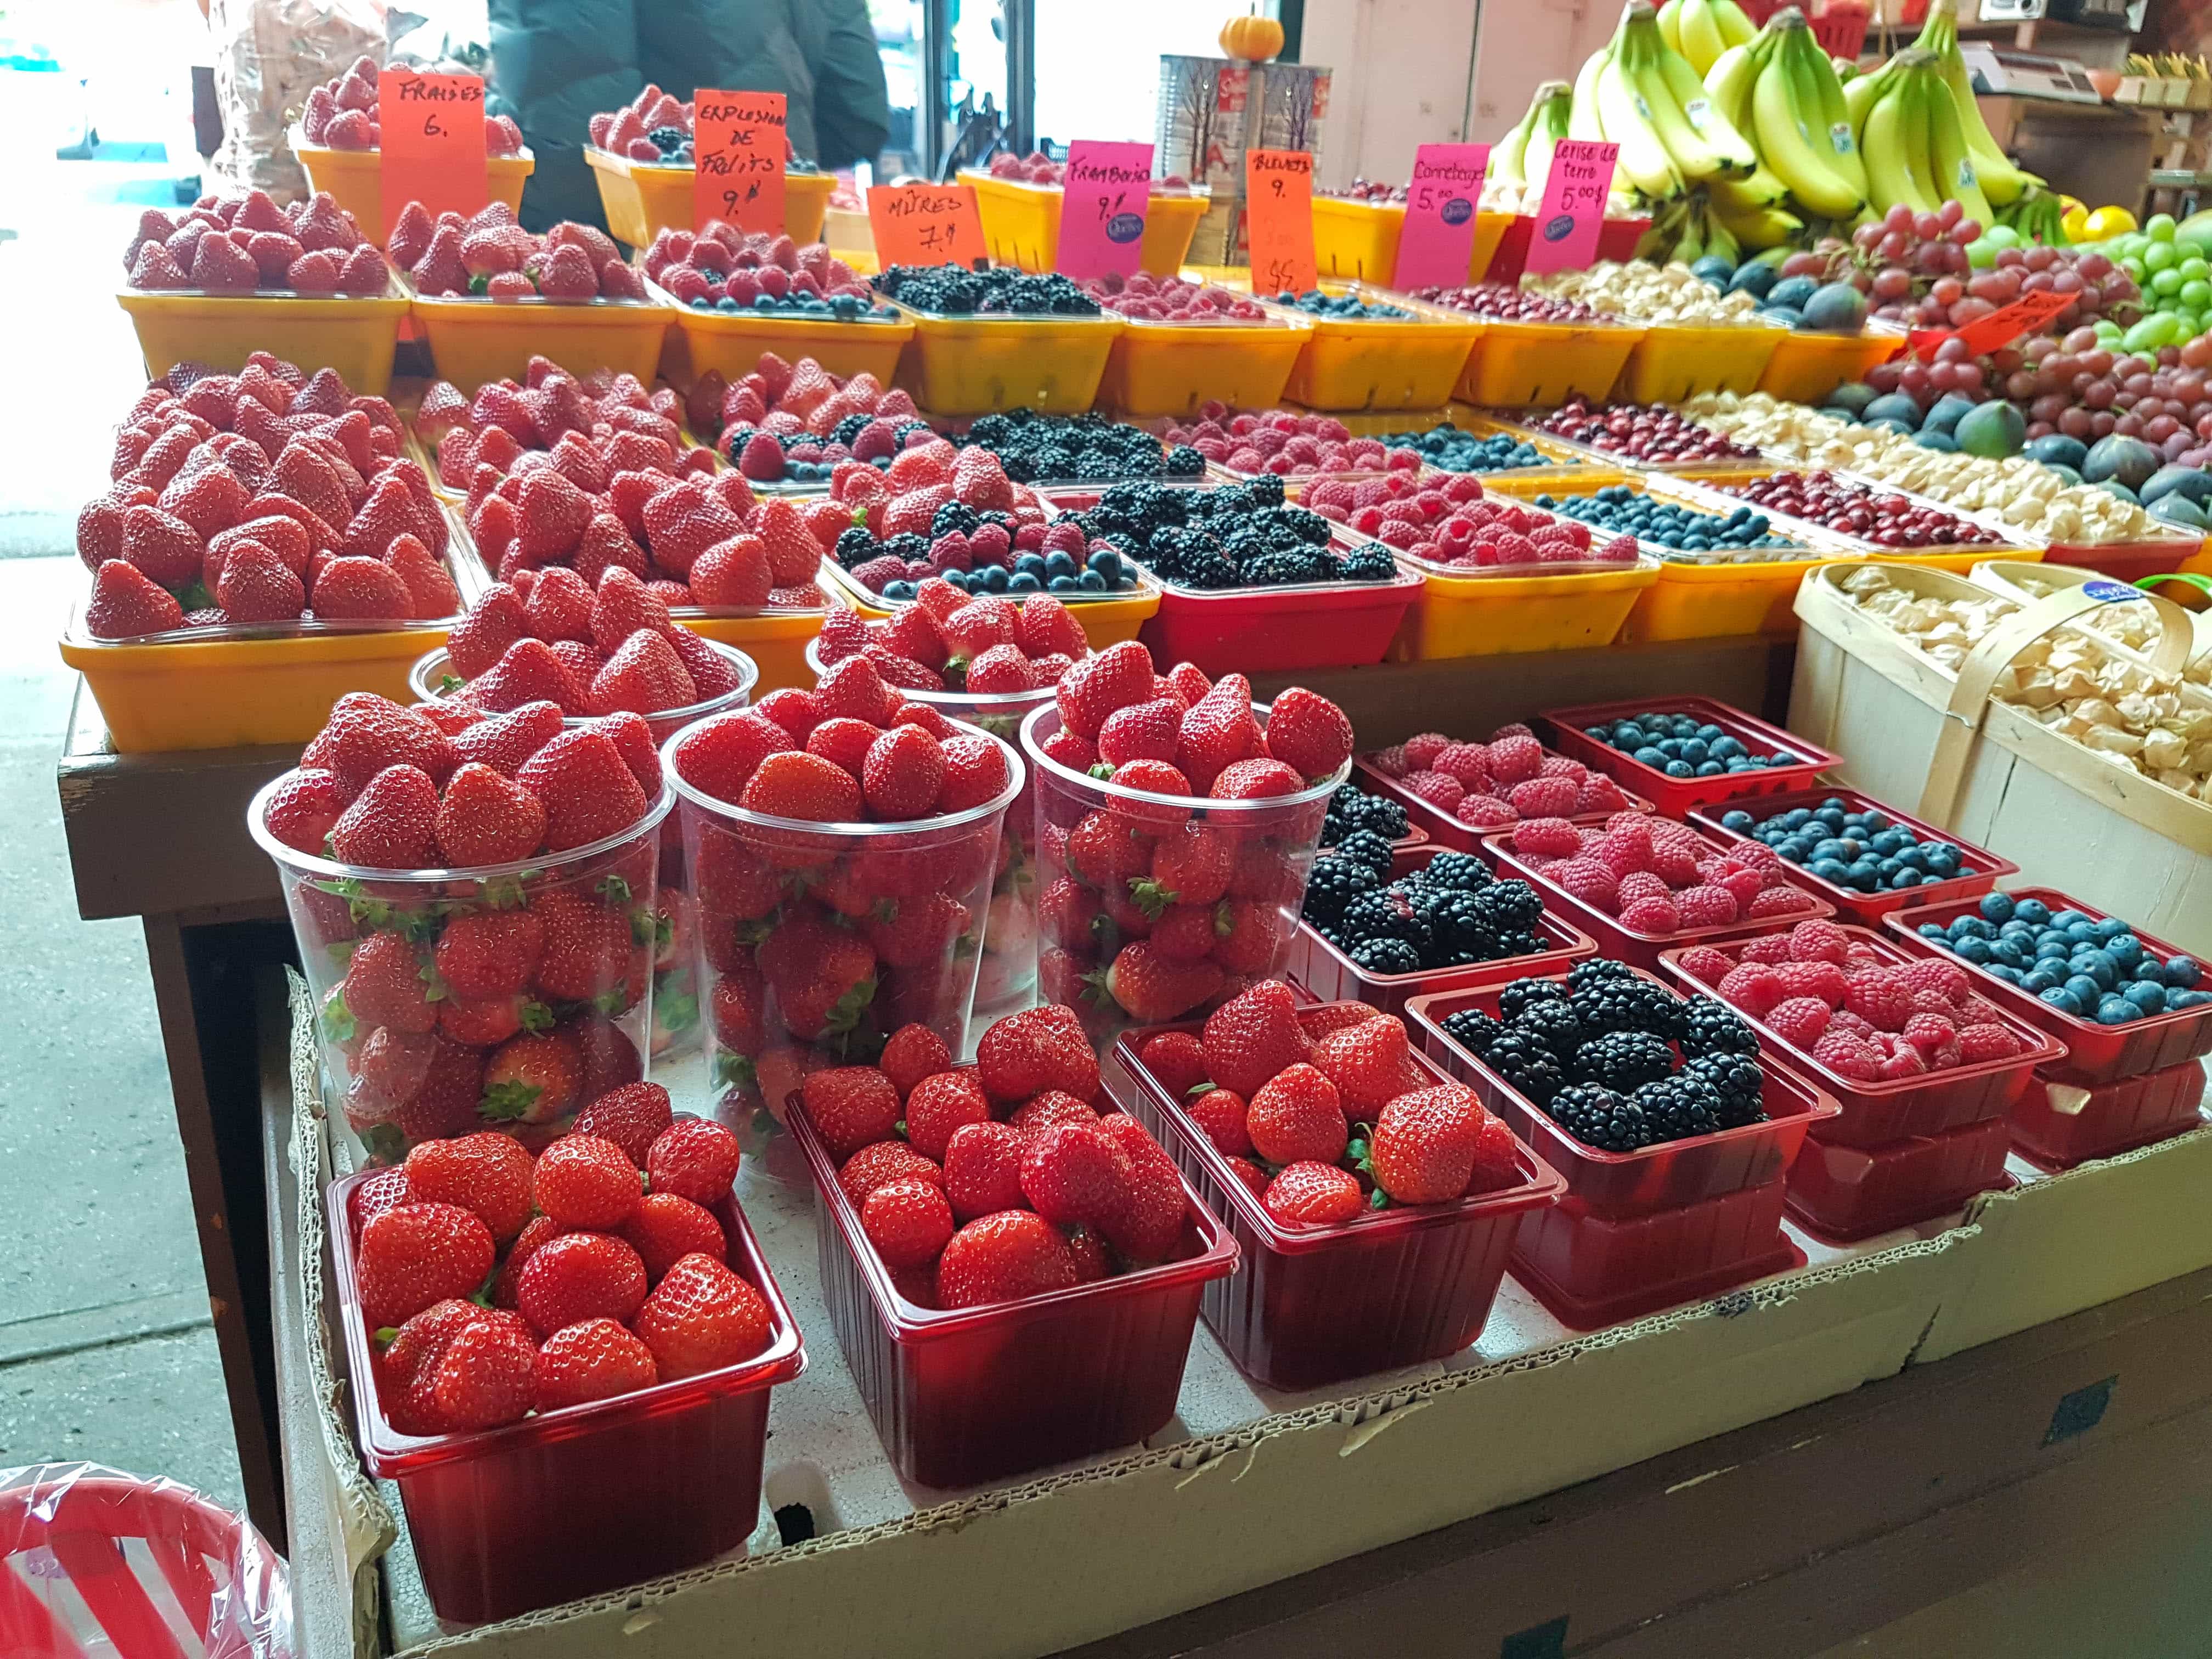 Why You Need to Visit the Montreal Markets